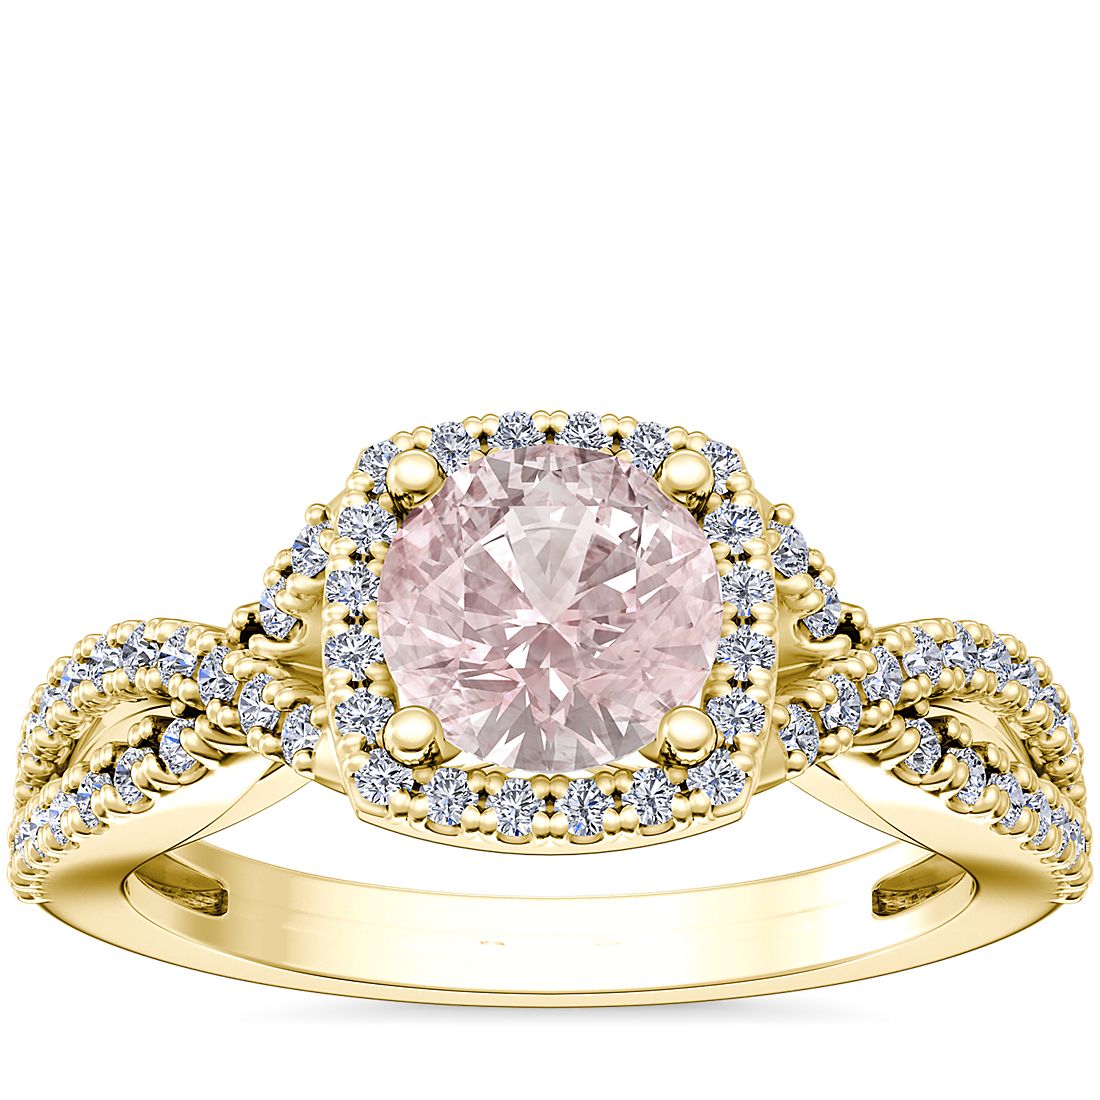 Twist Halo Diamond Engagement Ring with Round Morganite in 14k Yellow Gold (6.5mm)